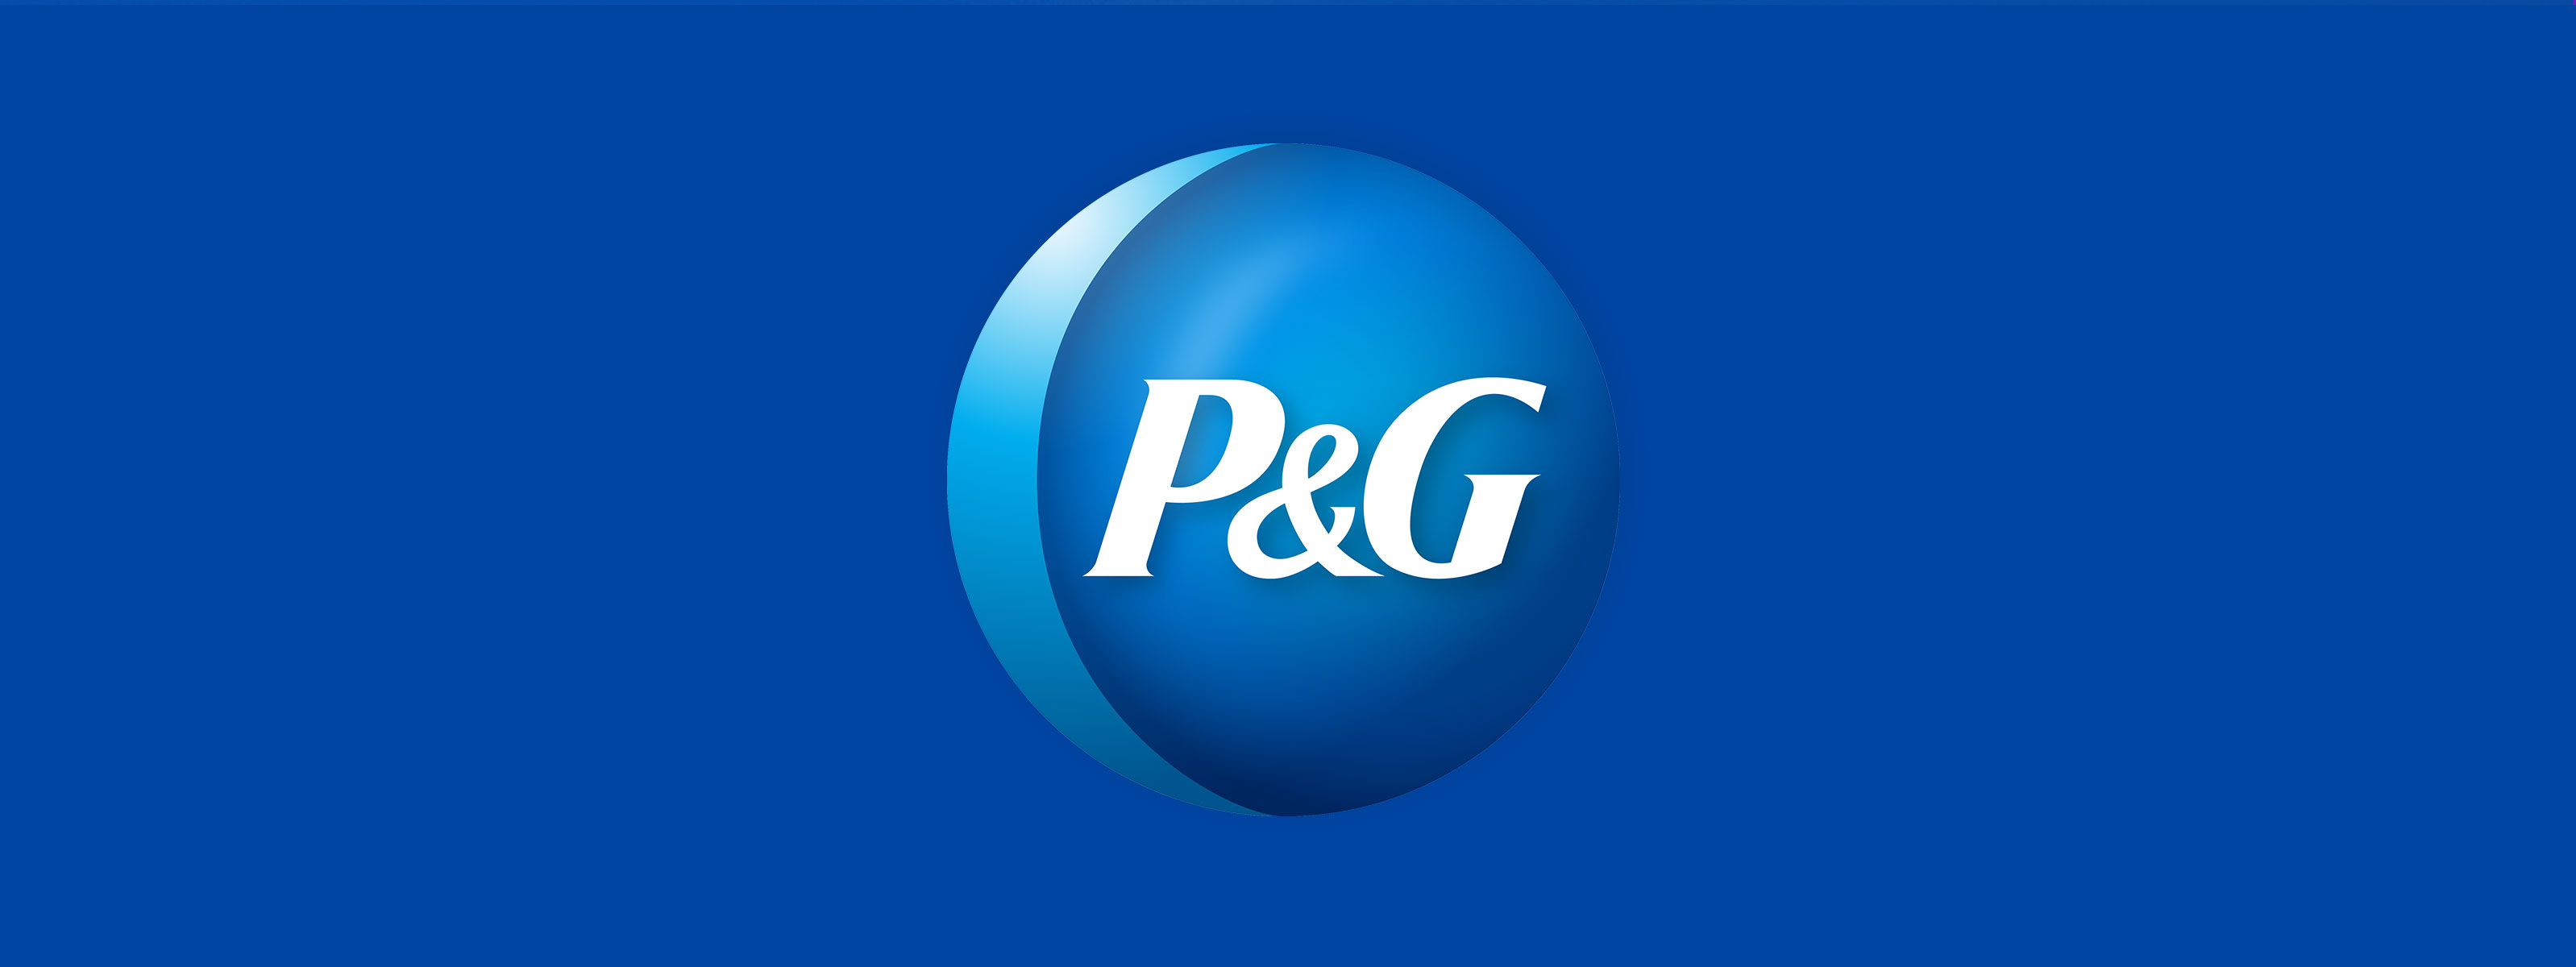 Procter and Gamble Banner